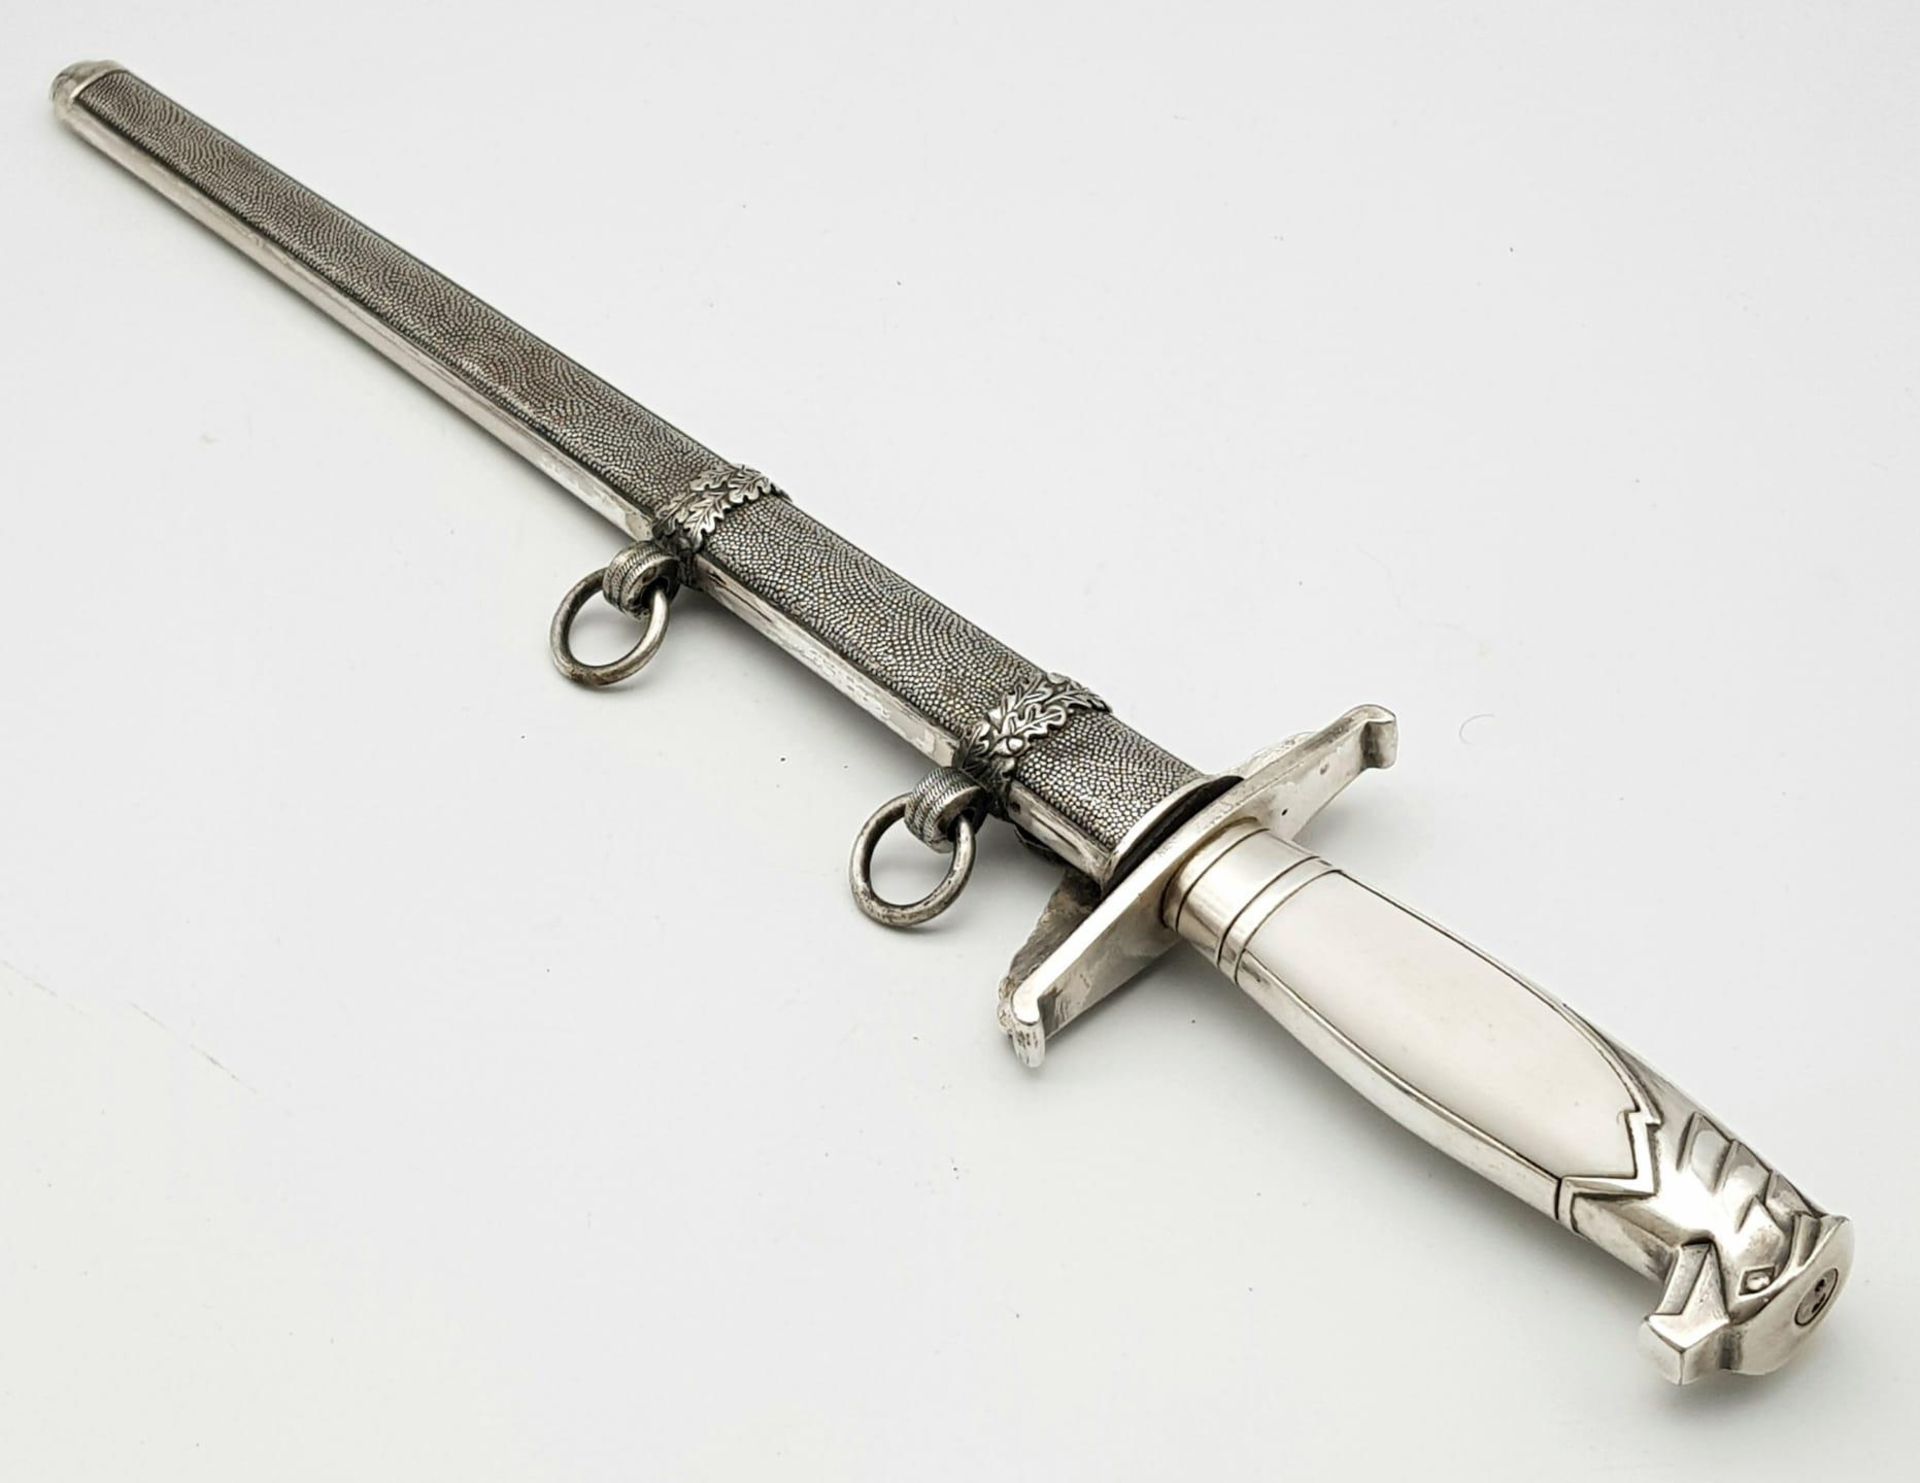 A WW2 German Diplomats Dagger - these stylish daggers had fake mother of pearl handles. This is a - Bild 7 aus 7